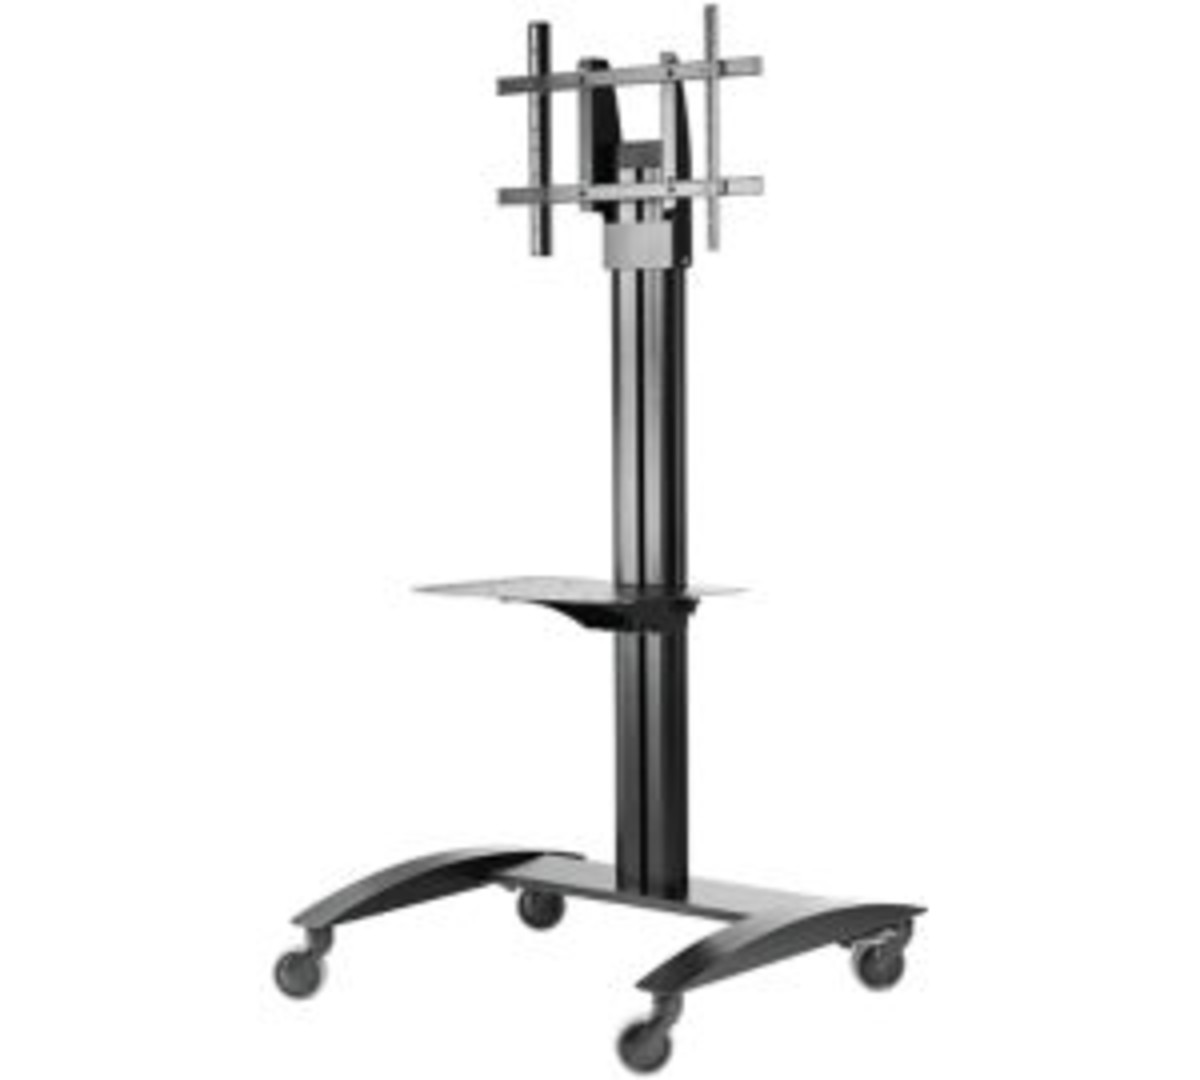 ACC-MS Metal Shelf for Trolley or Stand